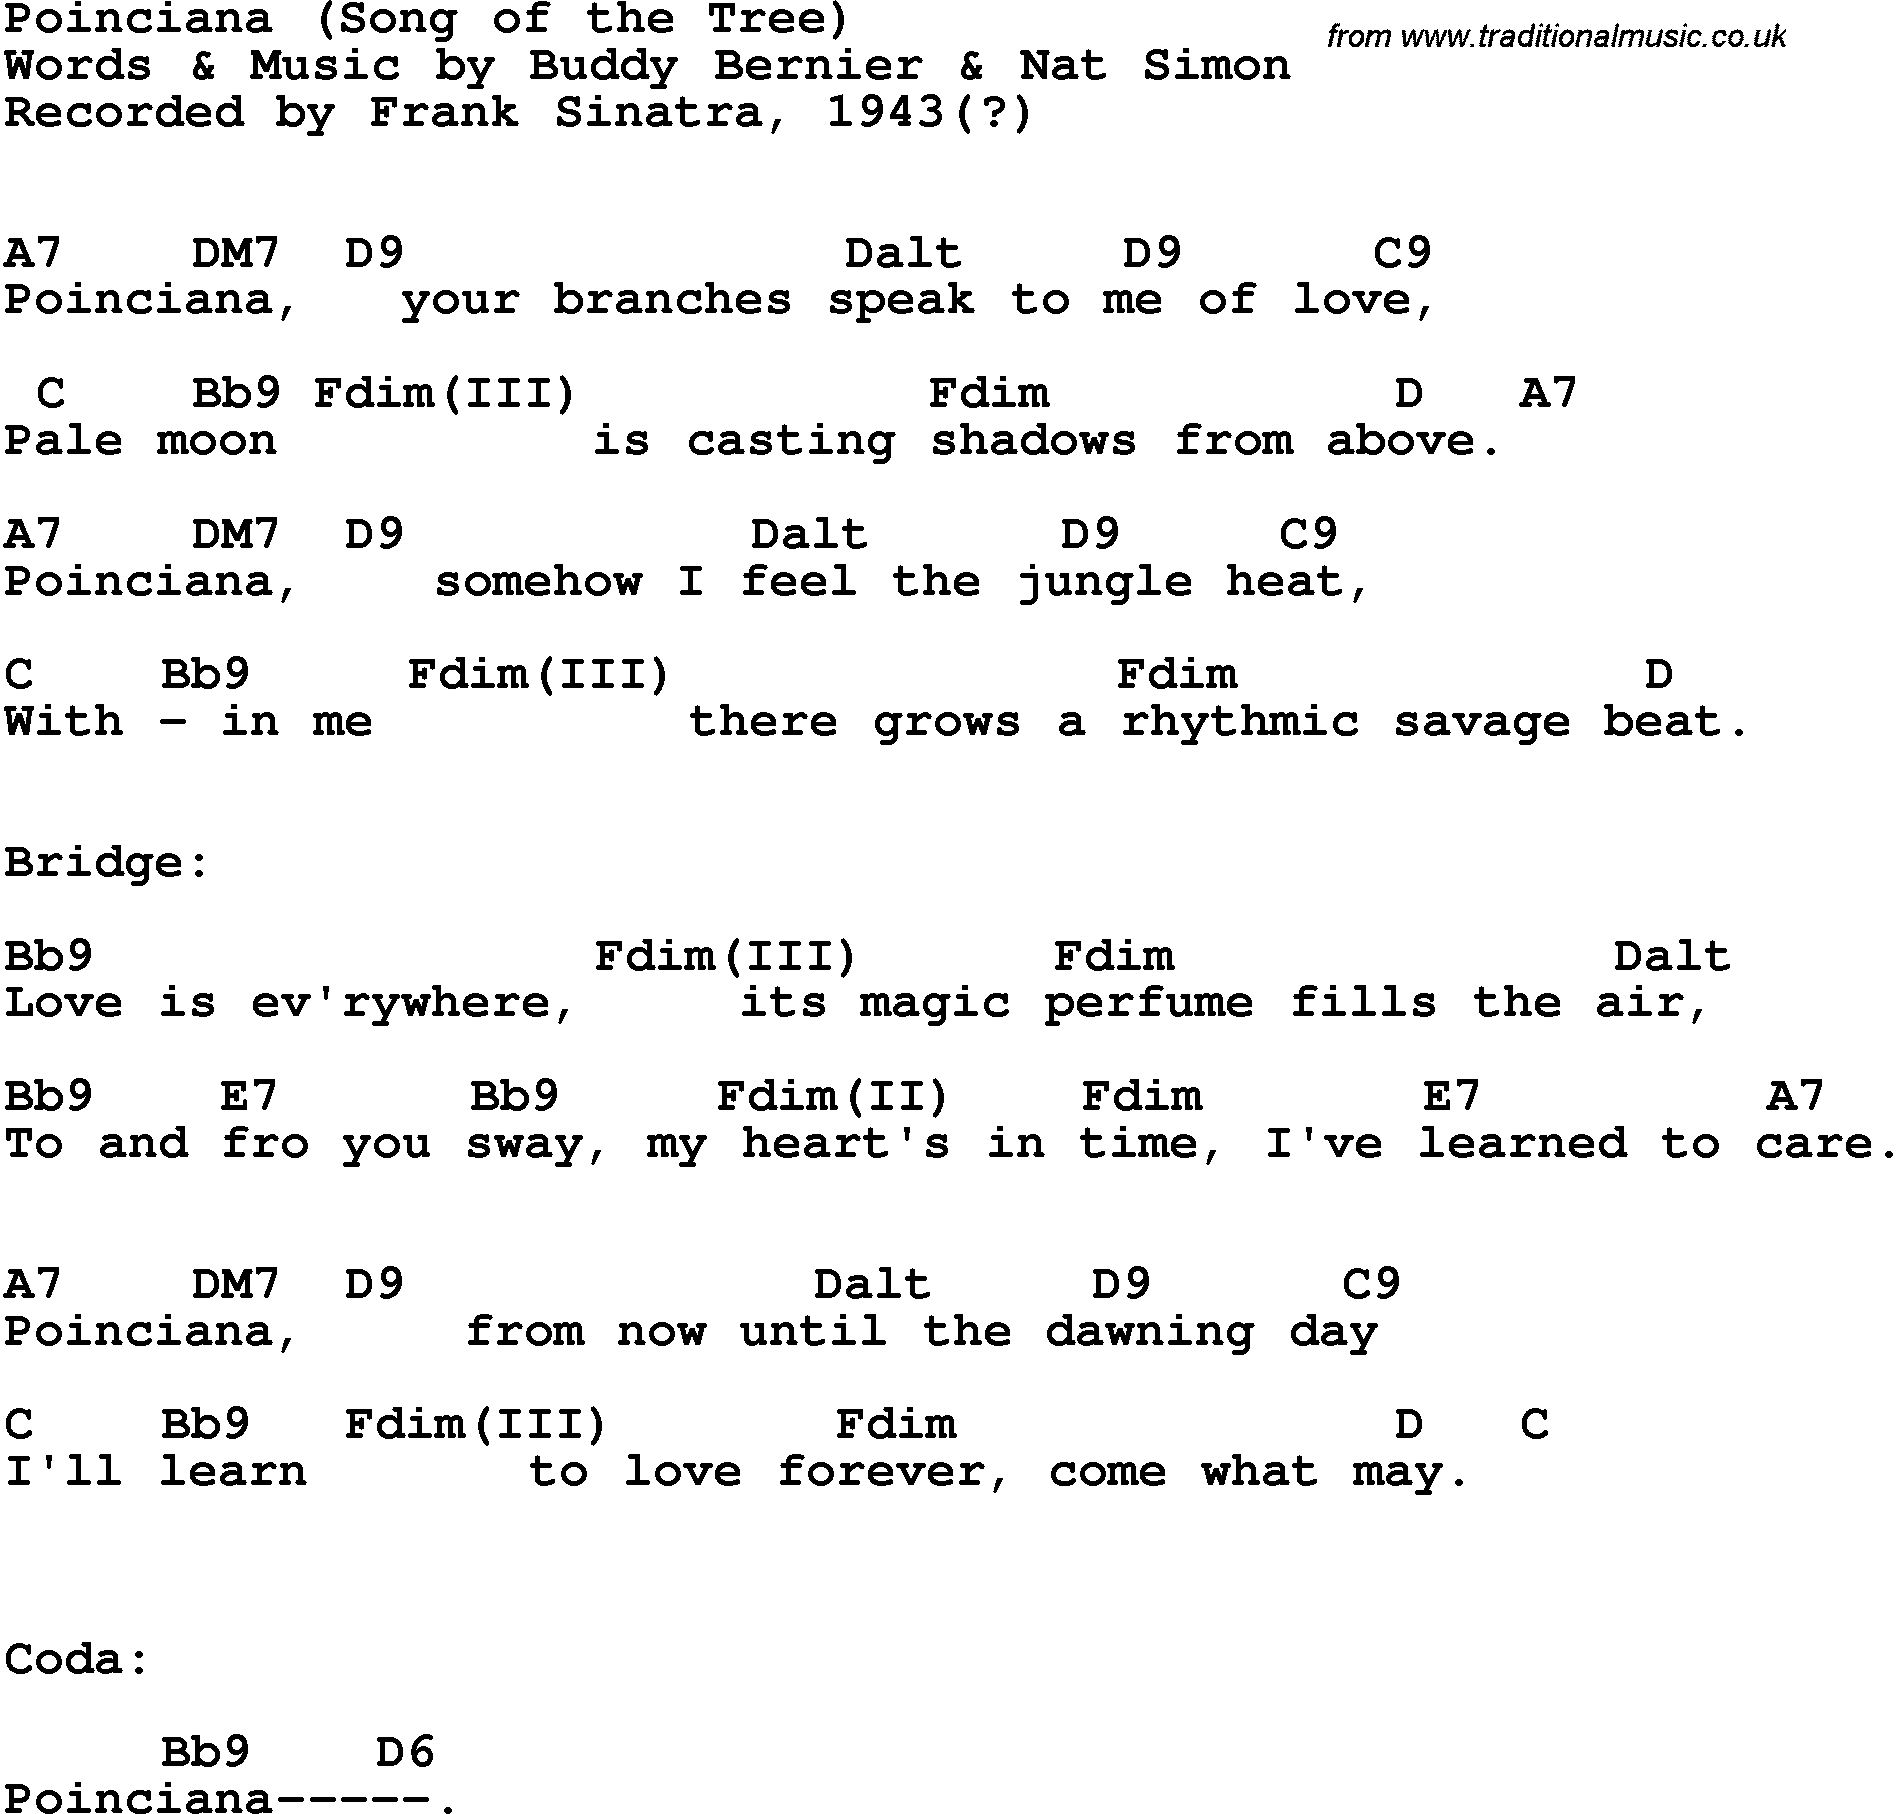 Song Lyrics with guitar chords for Poinciana - Frank Sinatra, 1943